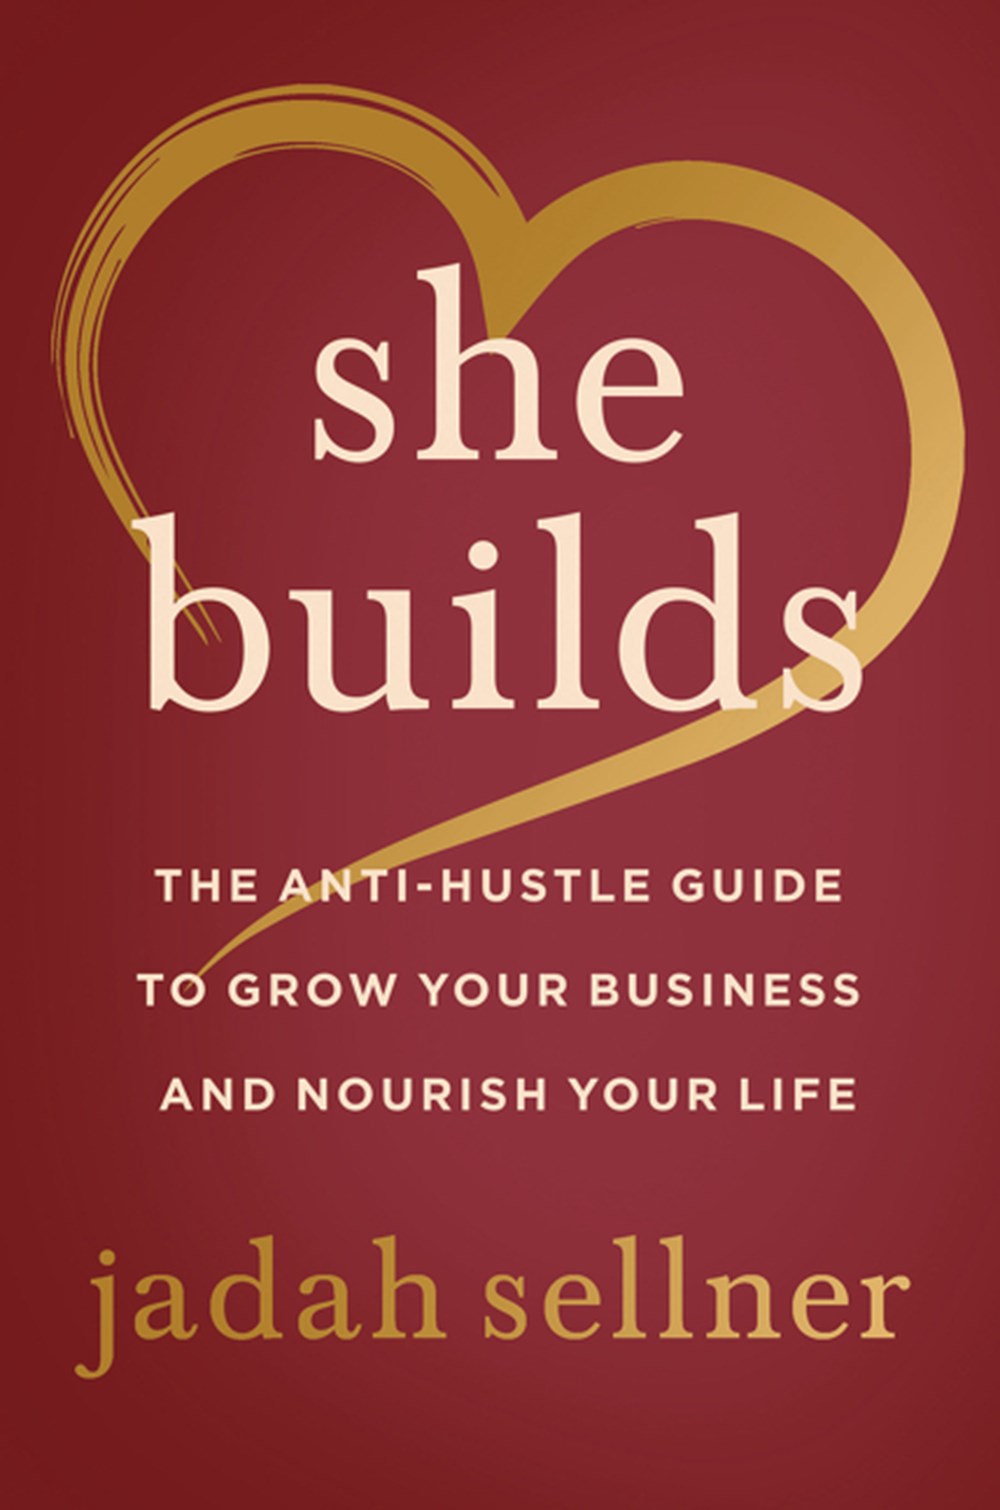 She Builds: The Anti-Hustle Guide to Grow Your Business and Nourish Your Life